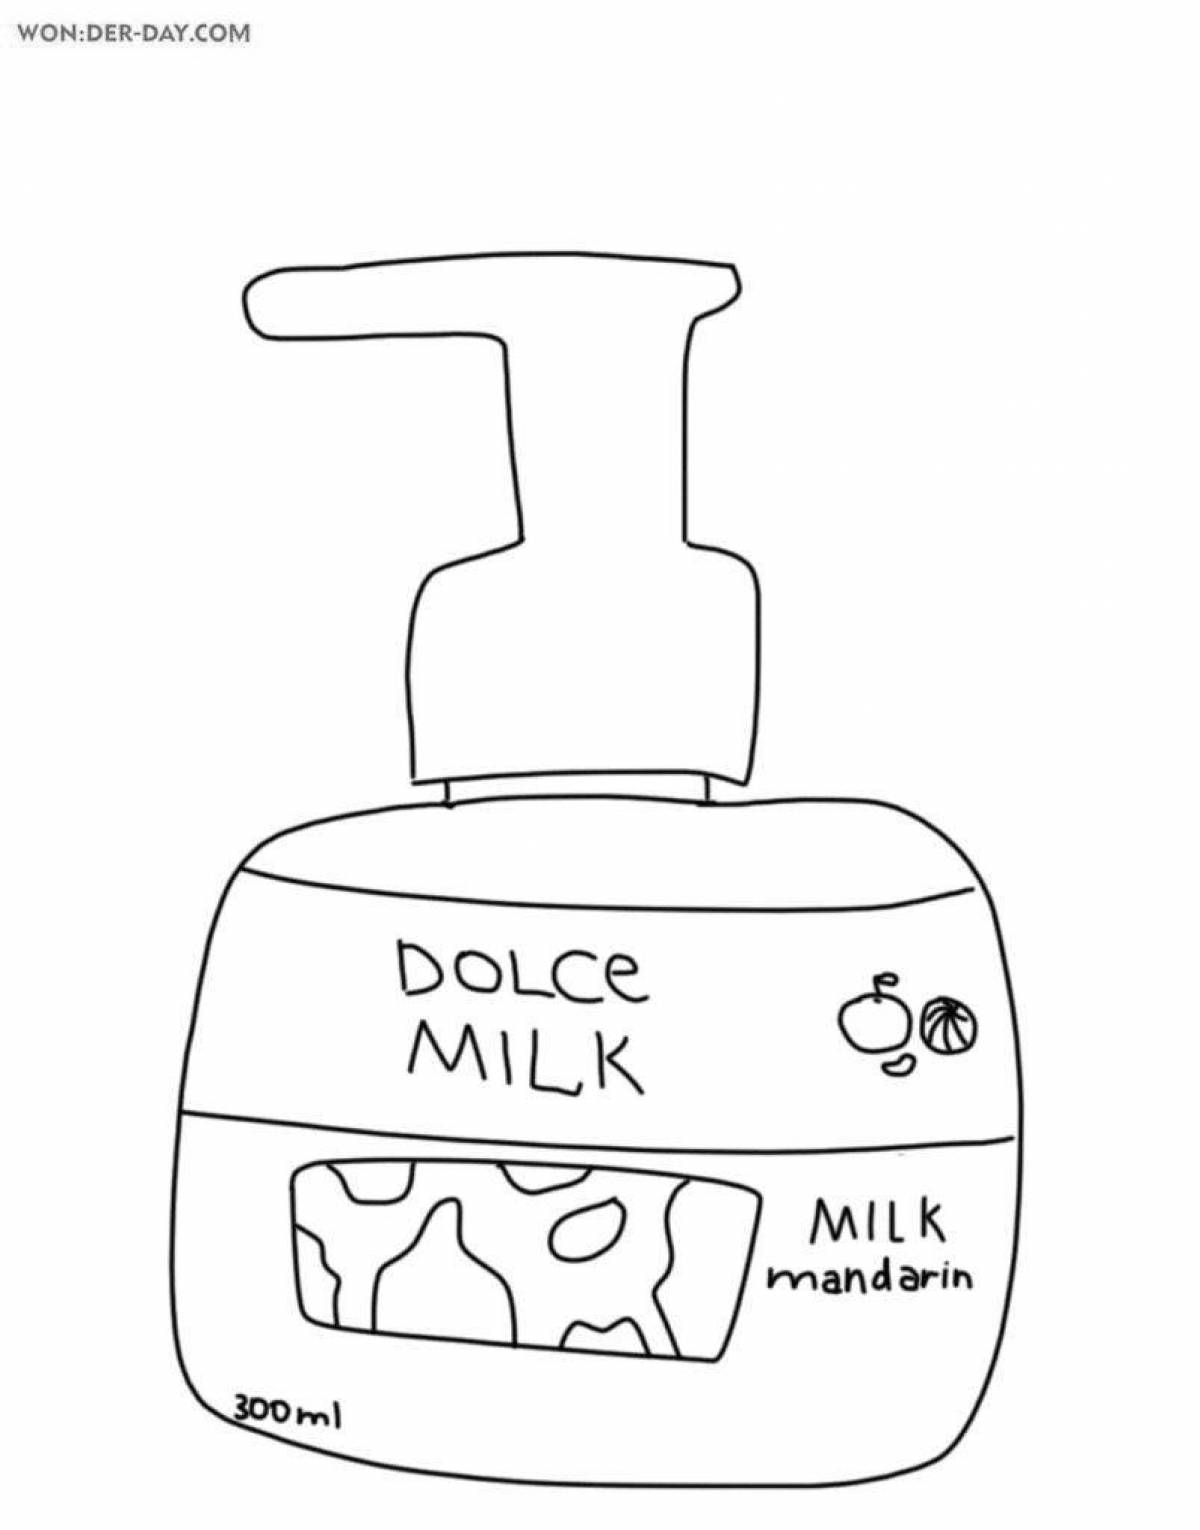 Coloring book glowing milk duck dolce